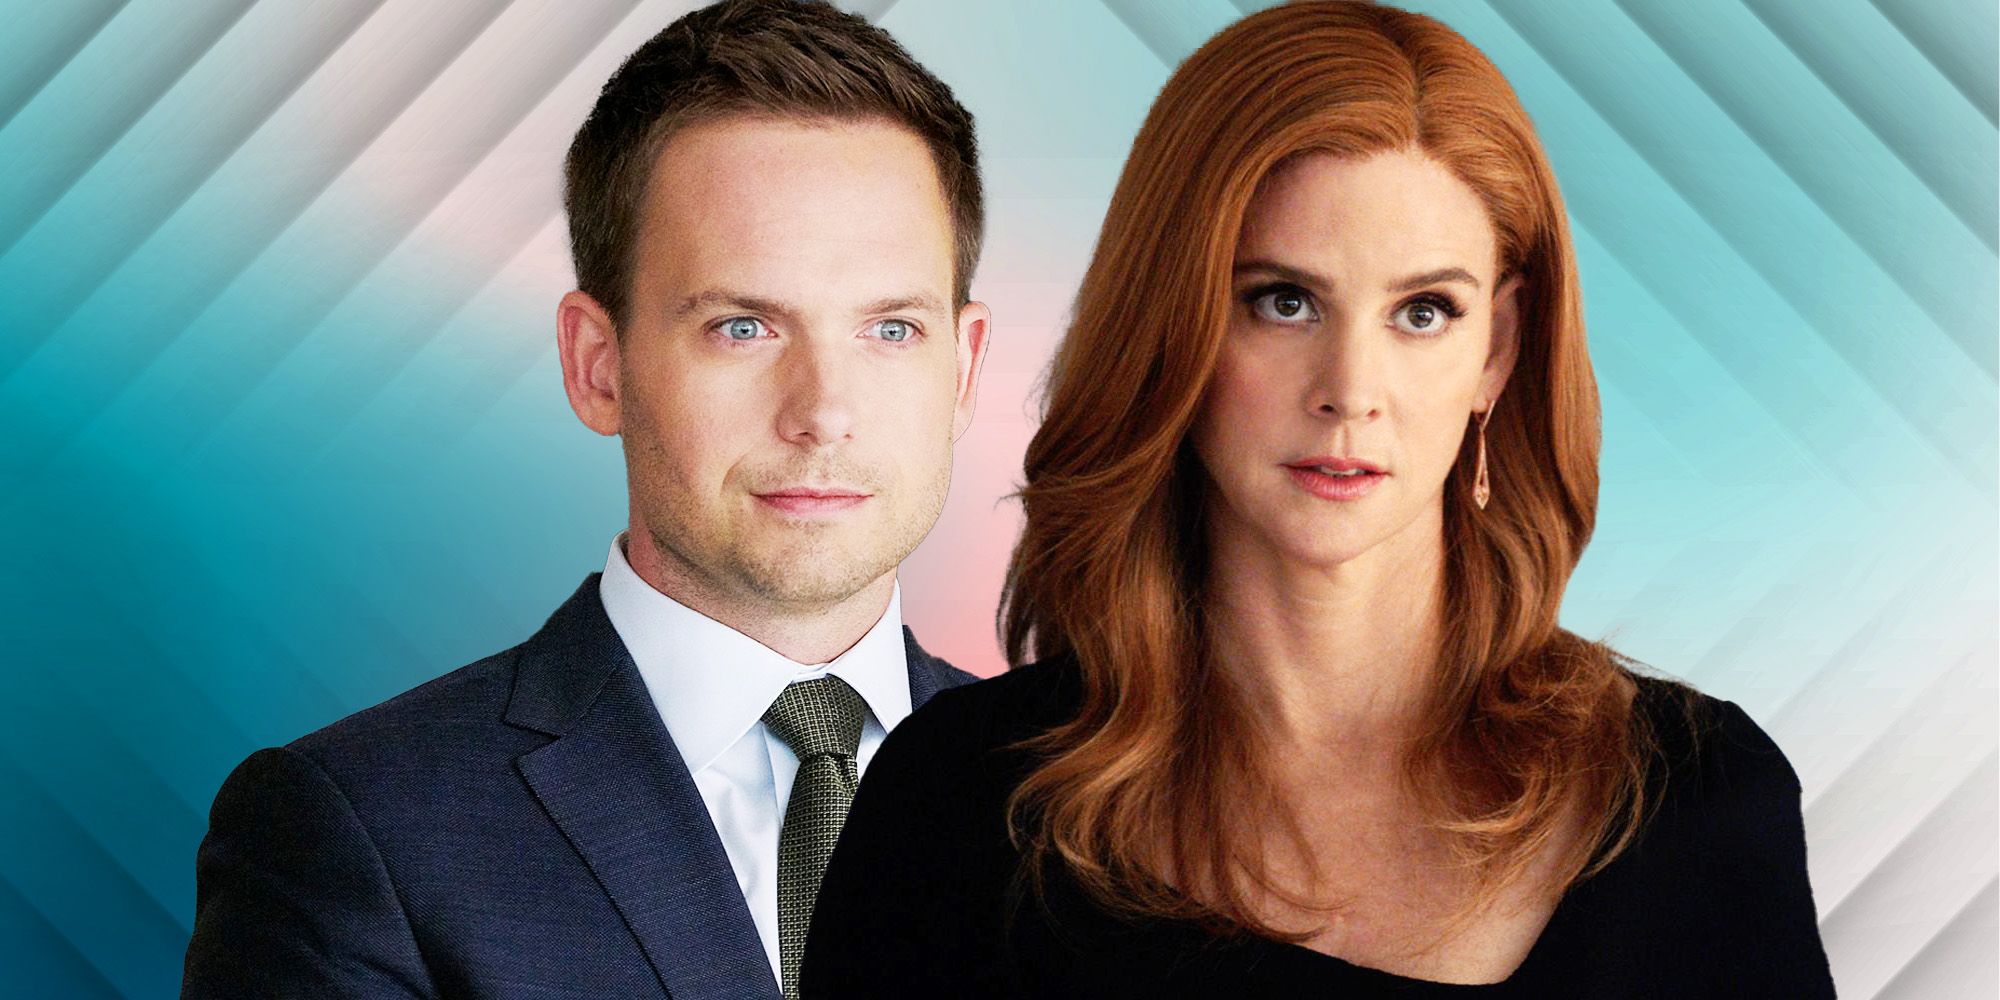 Custom image of Mike and Donna from Suits